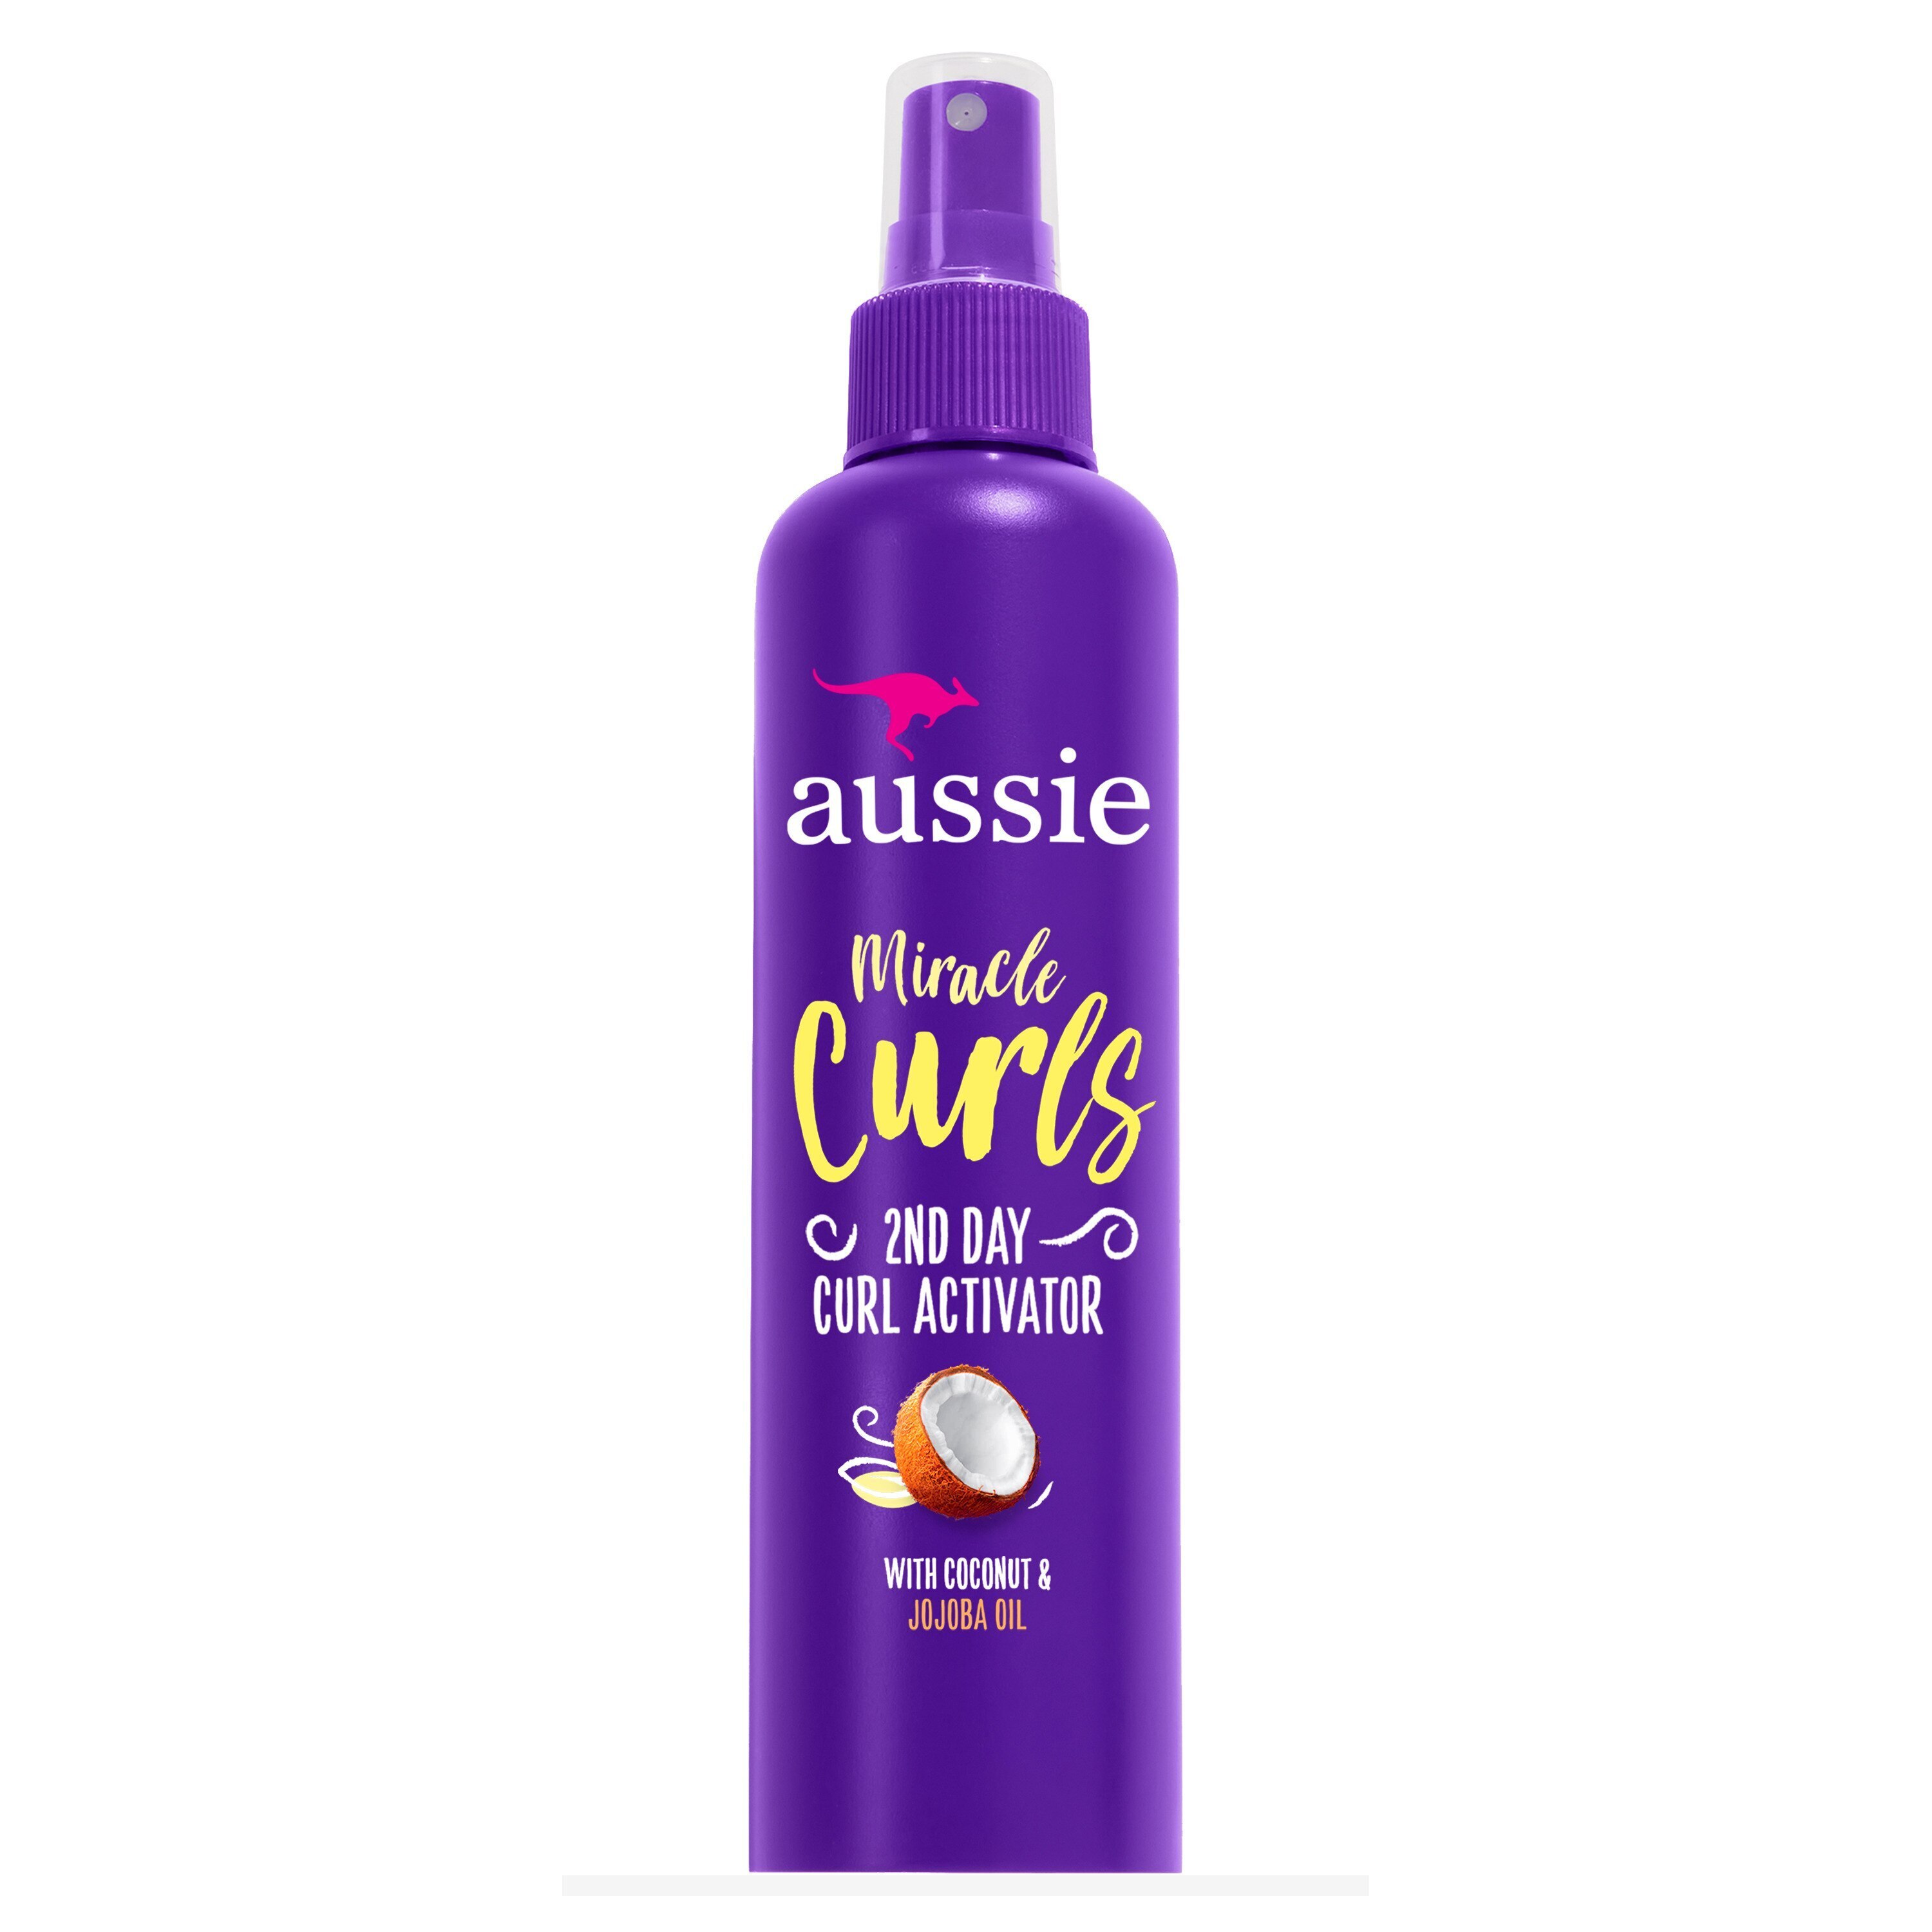 Aussie Miracle Curls 2nd Day Curl Activator, 8.5 OZ